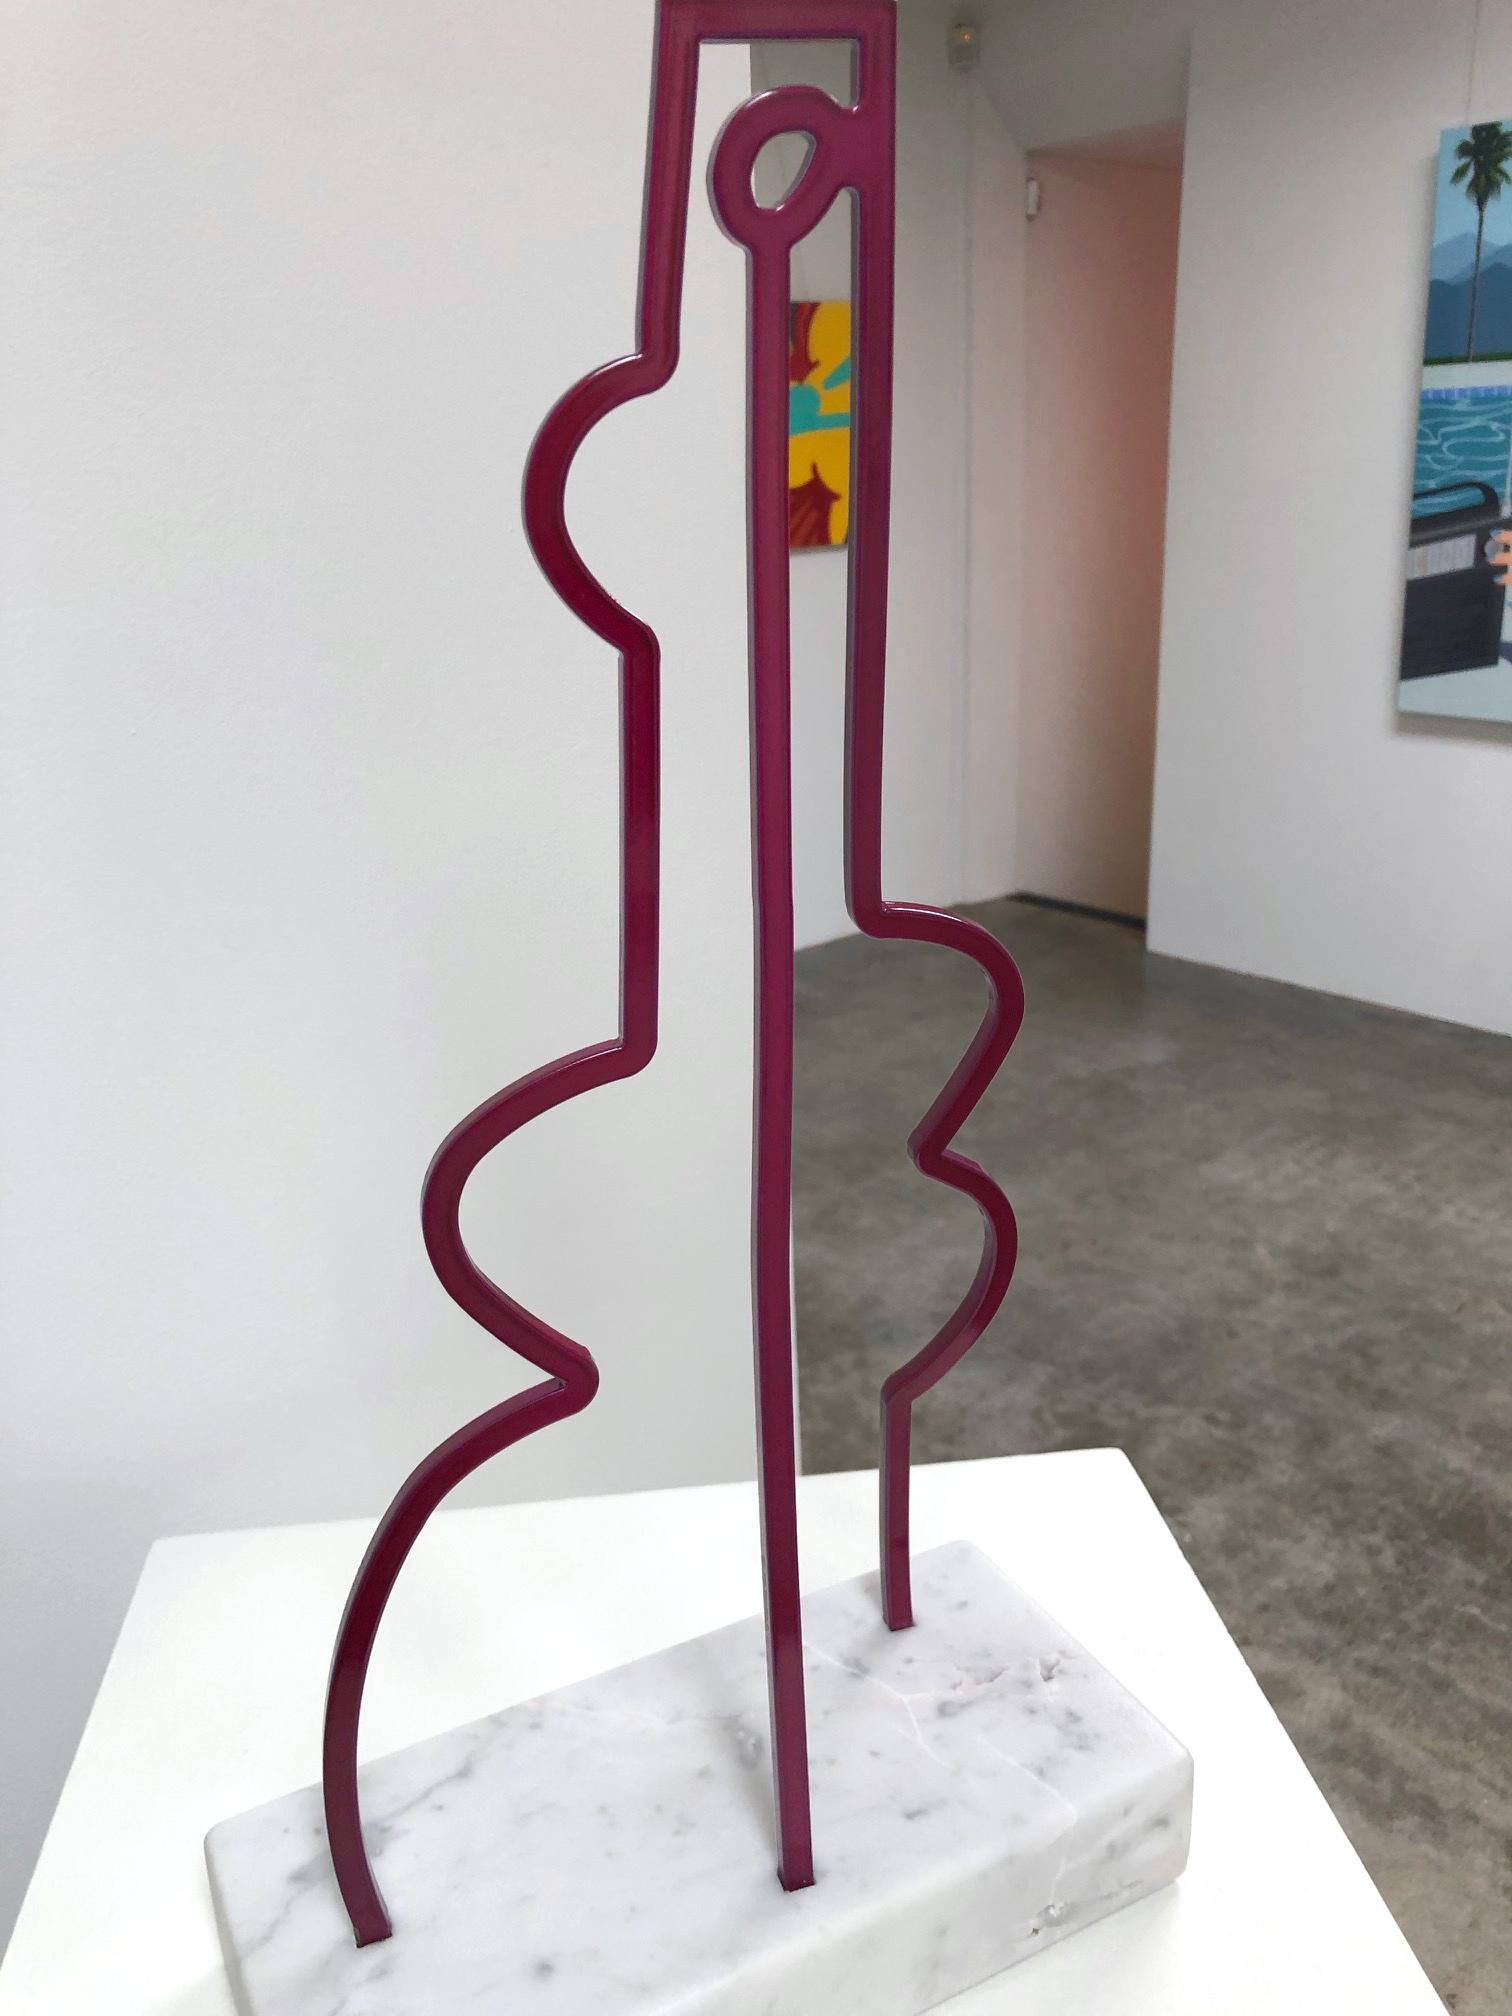 An abstracted figurative sculpture by America Martin completed in steel. Powder coated in deep magenta finish. 

AMERICA MARTIN
